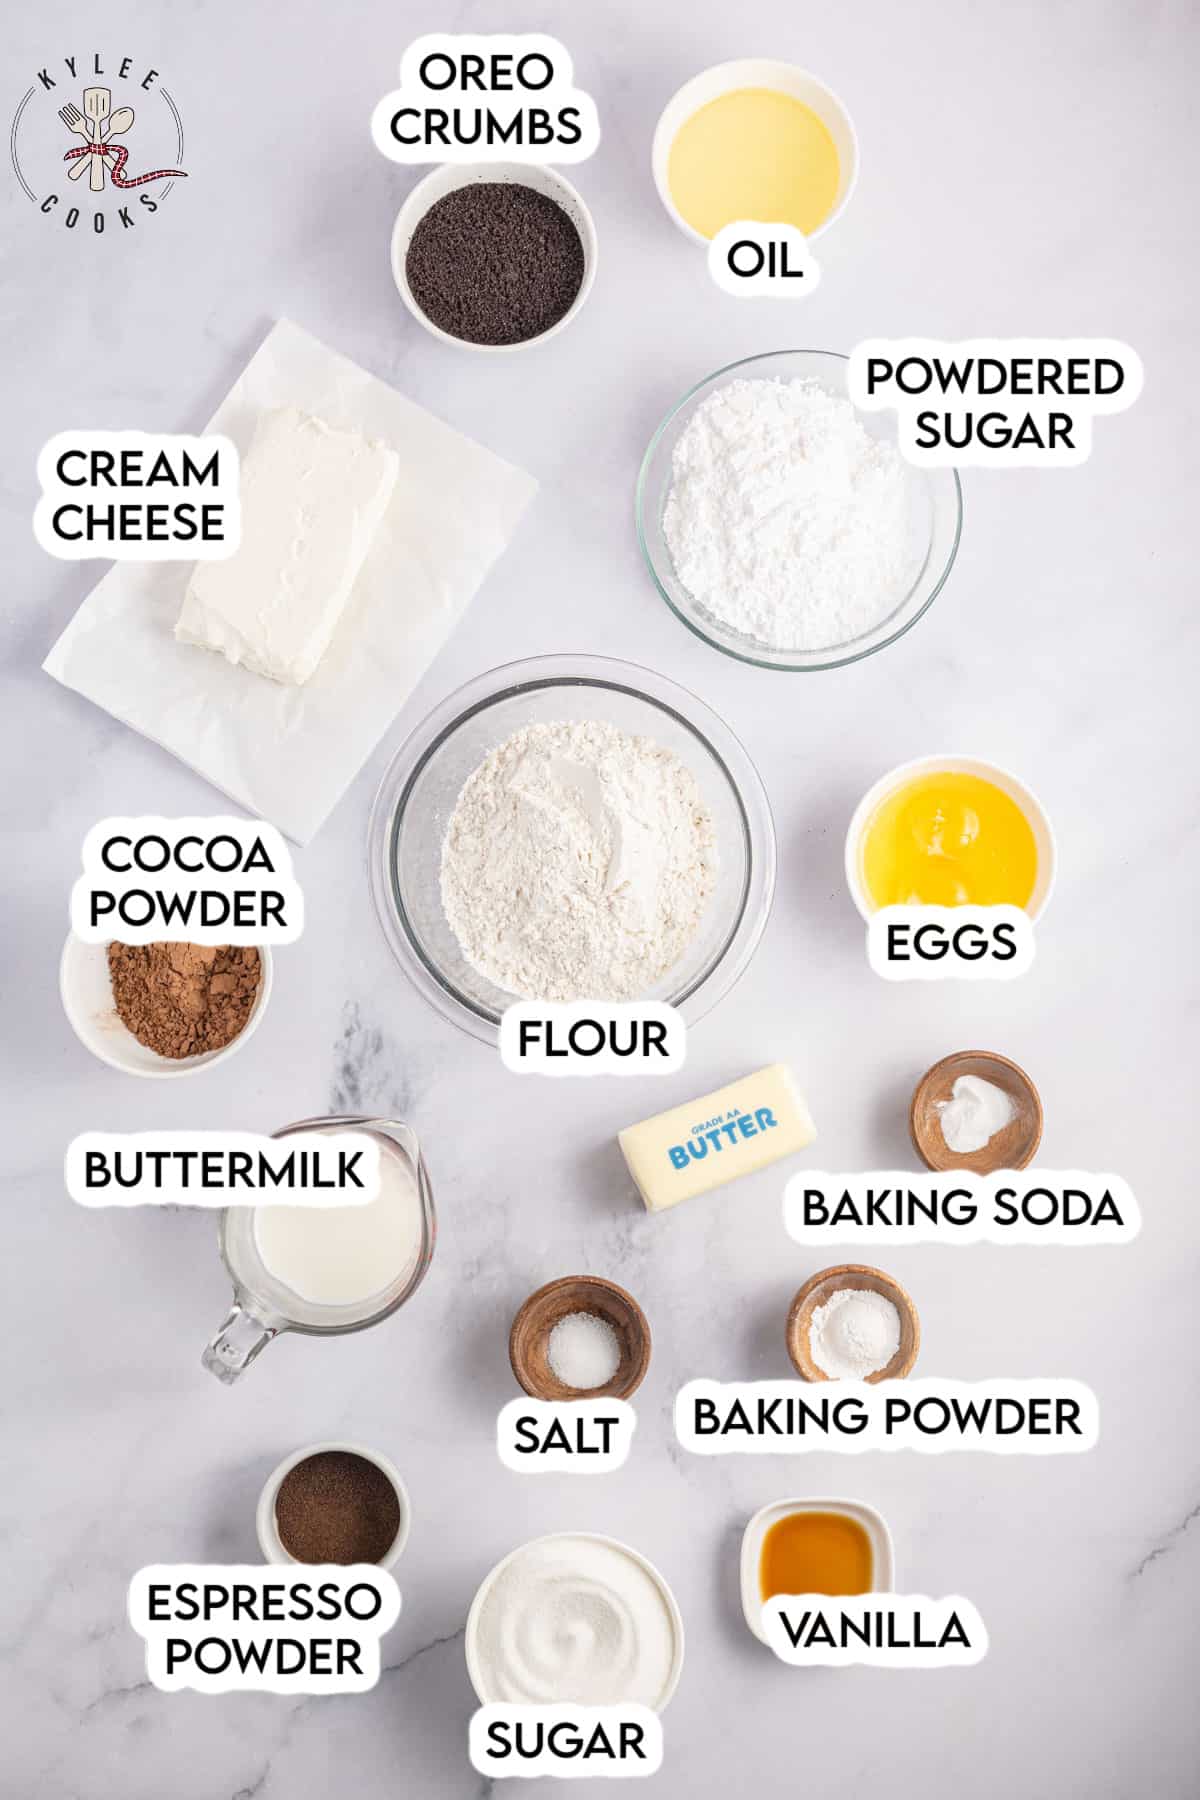 ingredients to make oreo cupcakes laid out and labeled.